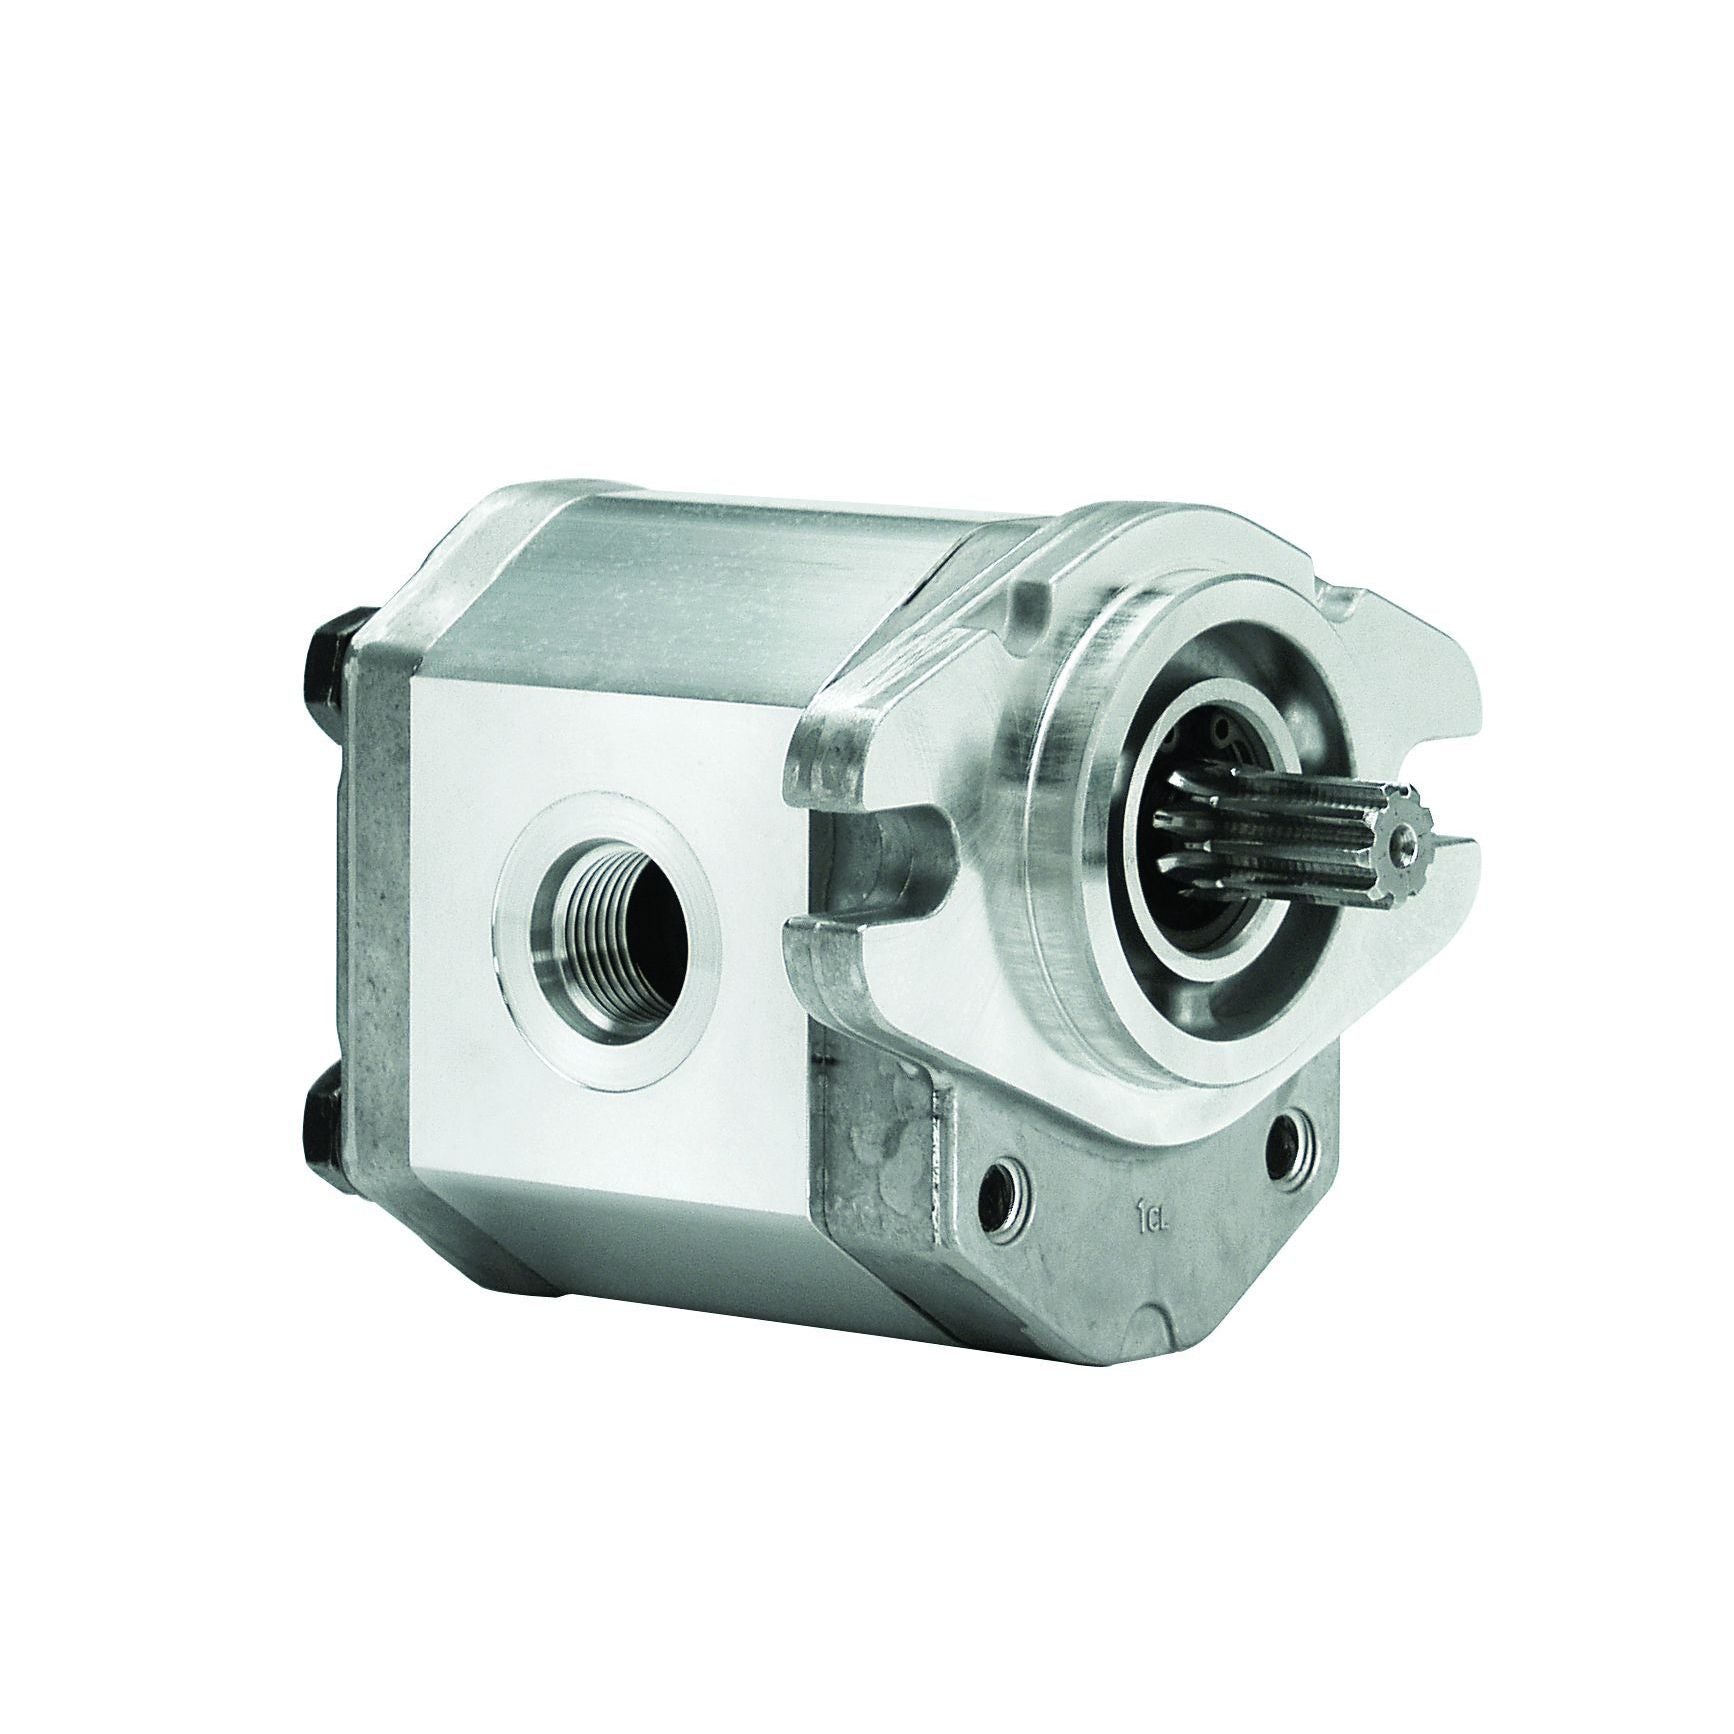 ALP1A-D-6-S1 : Marzocchi Gear Pump, CW, 4.1cc (0.2501in3), 1.95 GPM, 3625psi, 4000 RPM, #8 SAE (1/2") In, #6 SAE (3/8") Out, Splined Shaft 9T 20/40DP, SAE AA 2-Bolt Mount